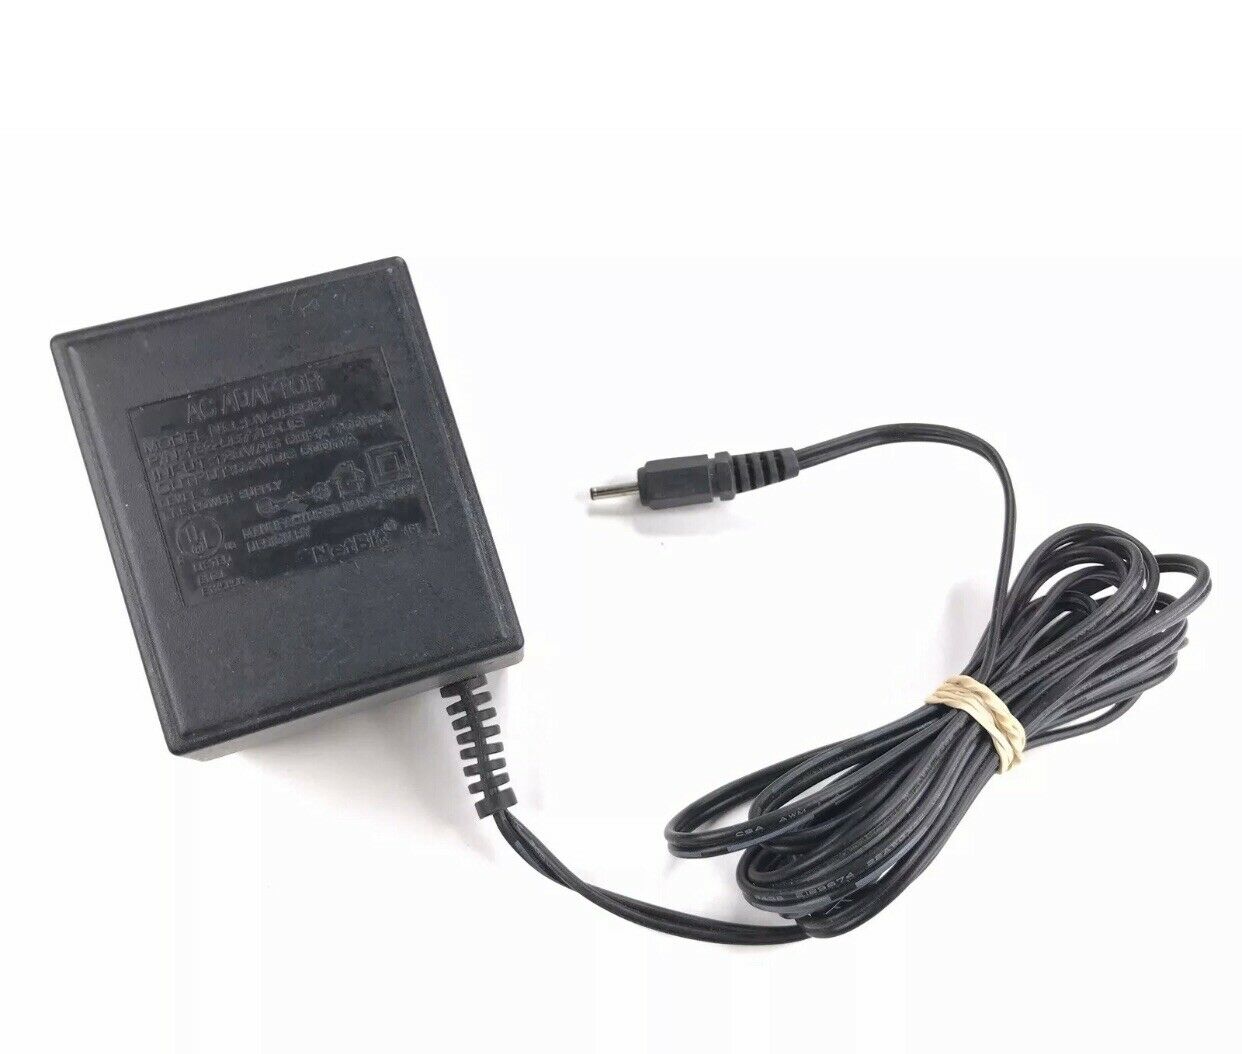 NetBit DV-0555R-1 163-5877B-US AC Power Supply Adapter Charger Output 5.2V 500mA - Click Image to Close